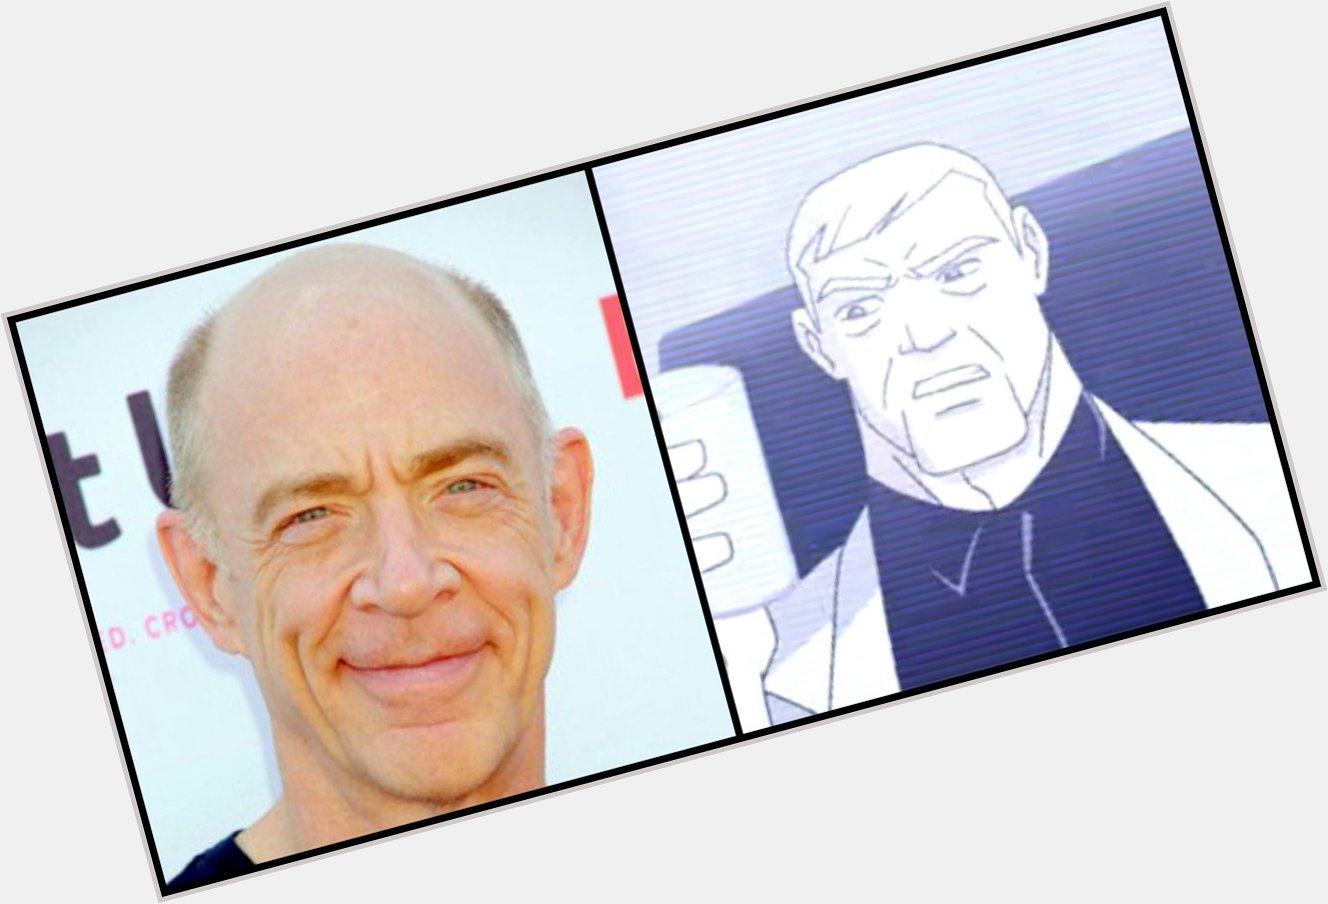 HAPPY BIRTHDAY: J.K. Simmons, who voiced White Knight from turns 63 years old today! 